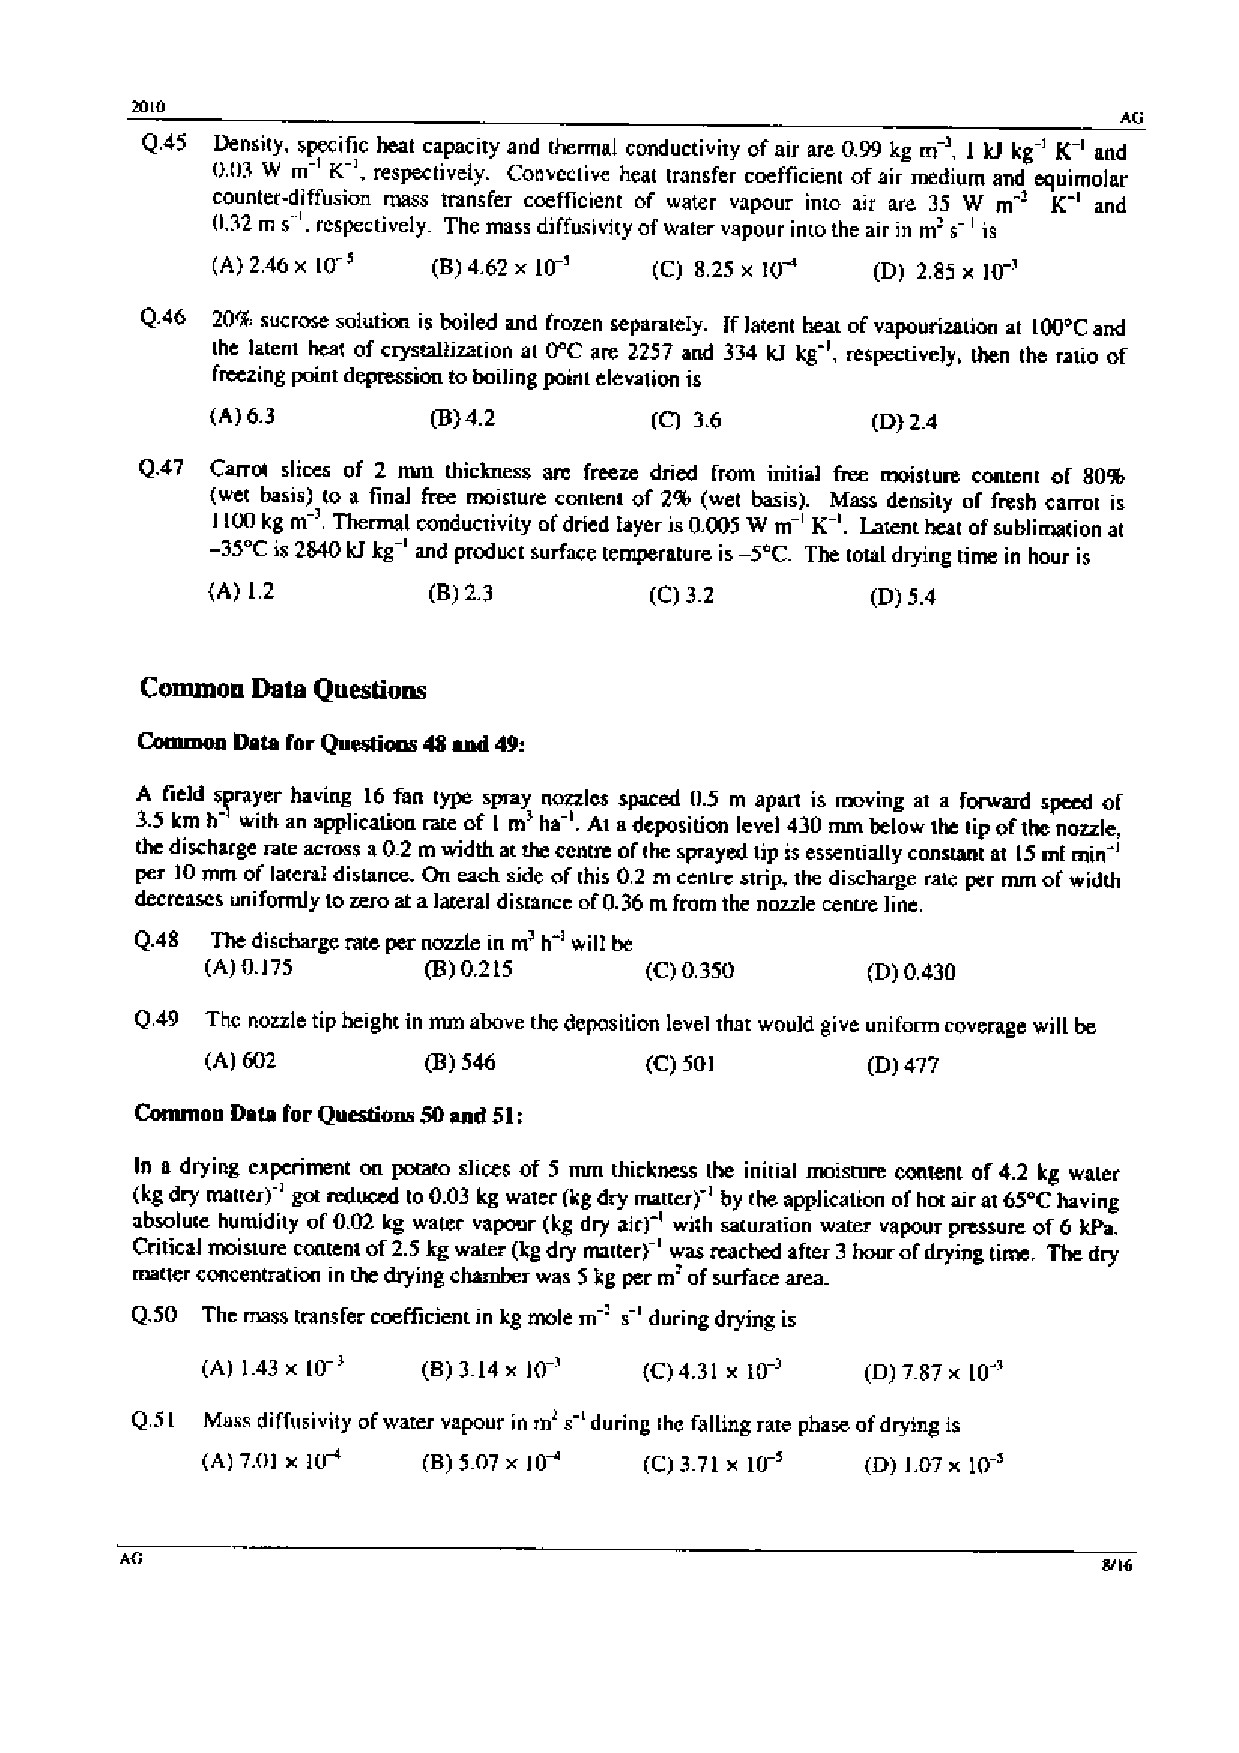 GATE Exam Question Paper 2010 Agricultural Engineering 8